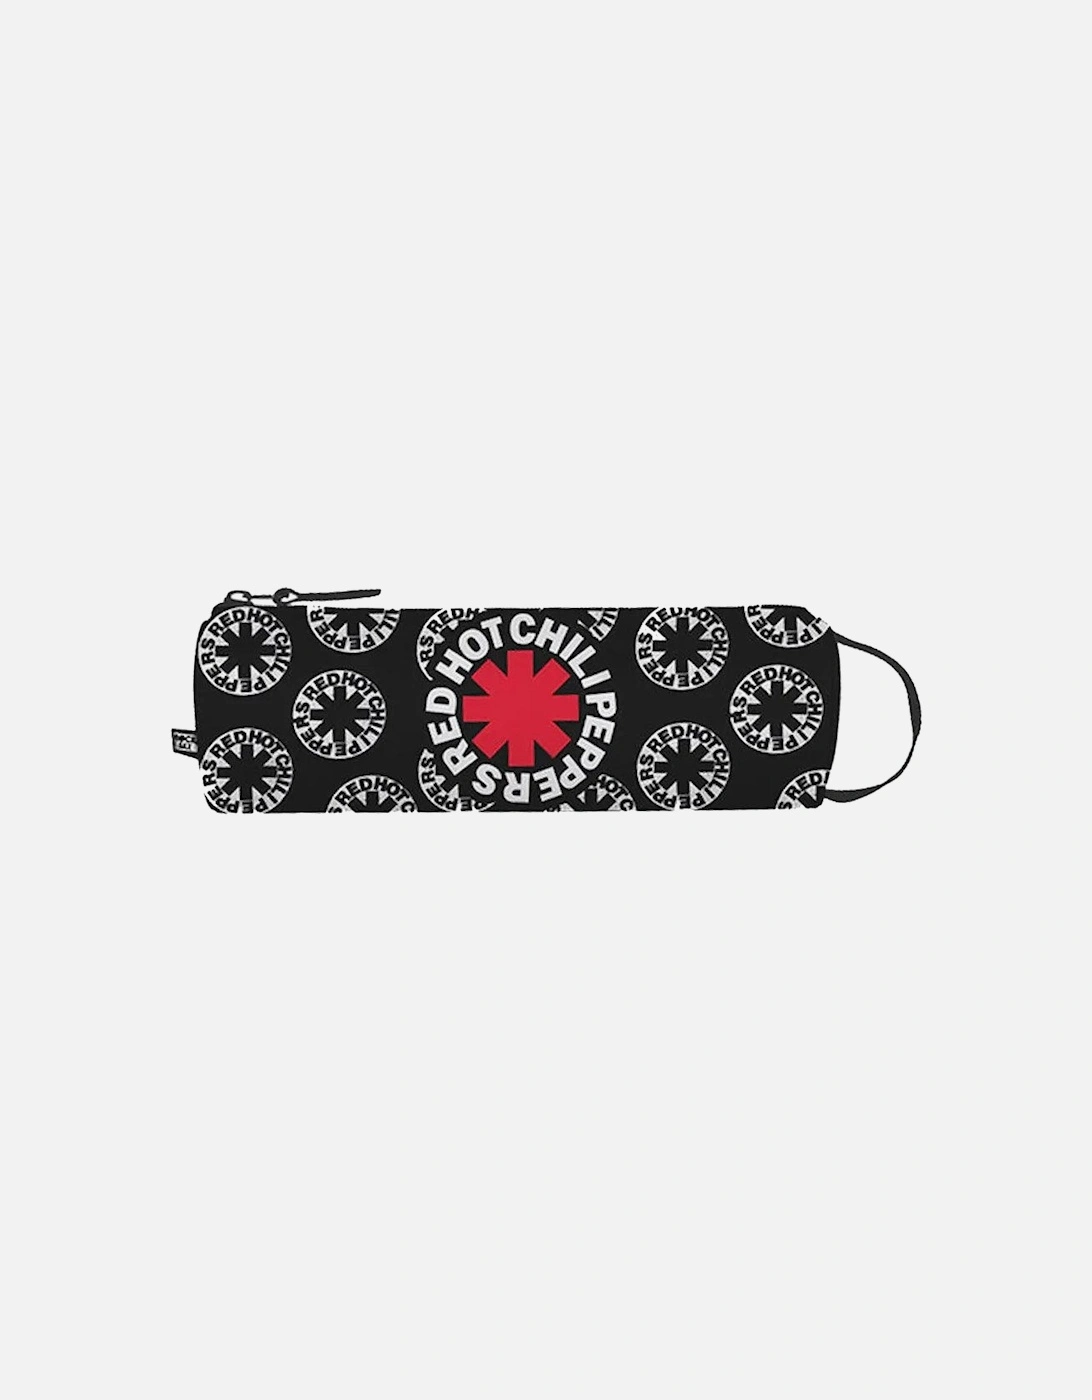 Asterix All-Over Print Red Hot Chili Peppers Pencil Case, 2 of 1